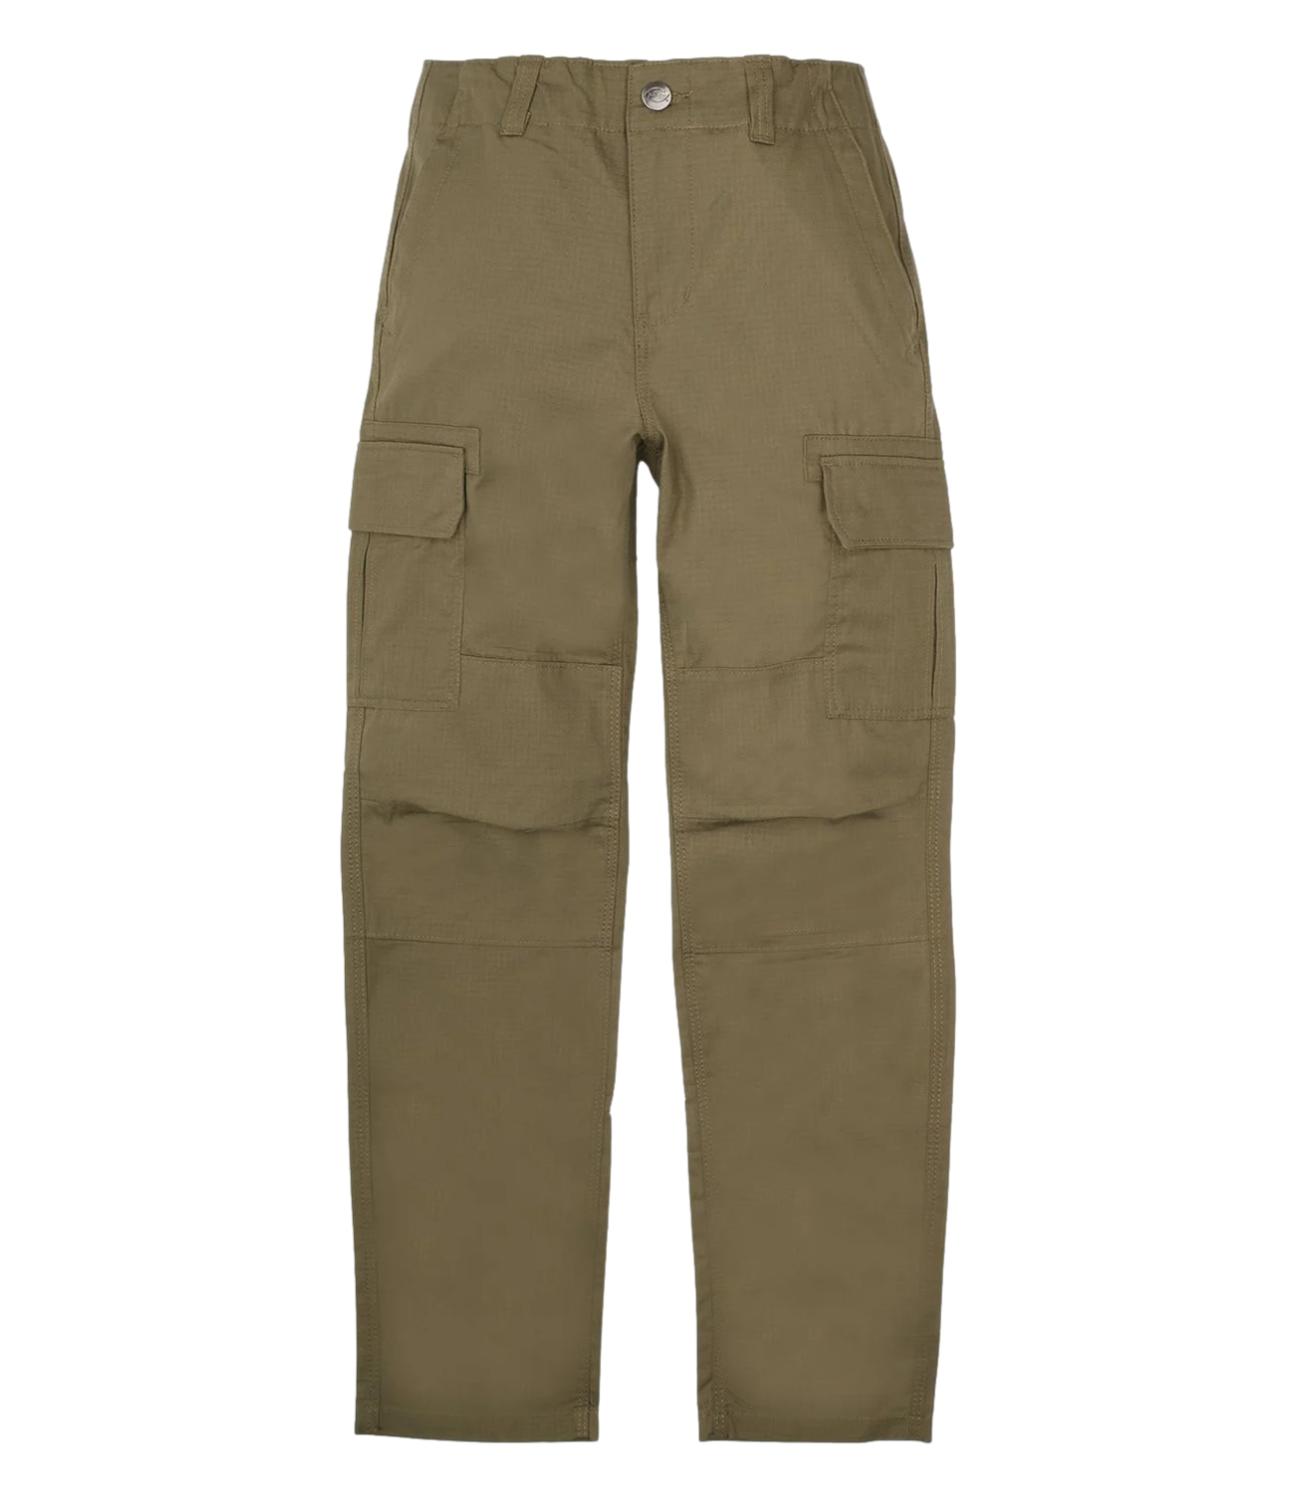 Mud green cargo trousers for men with large pockets